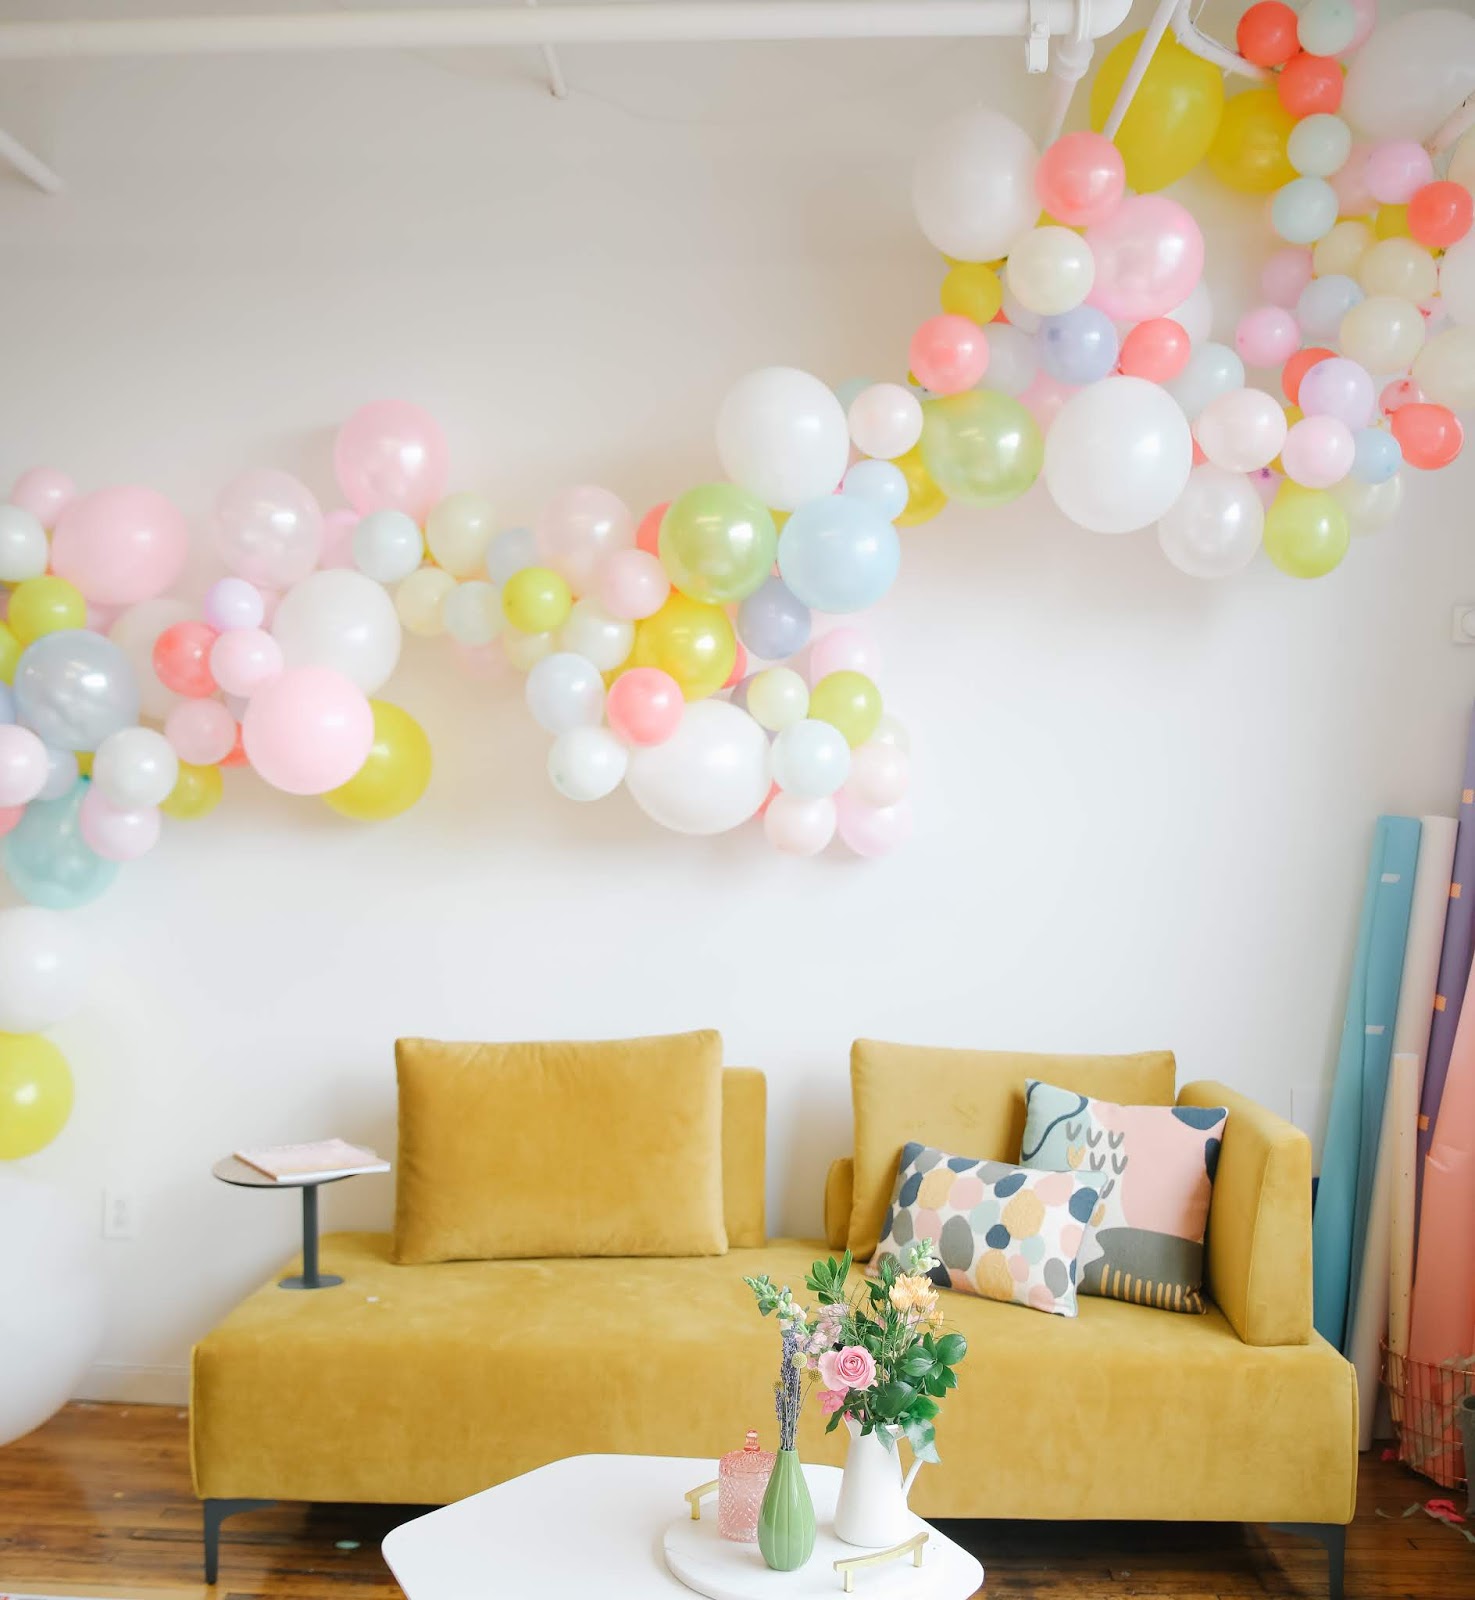 Our Studio Party! (Yayy!): I'll Show You How To Organize Your Next Party Like a Pro!